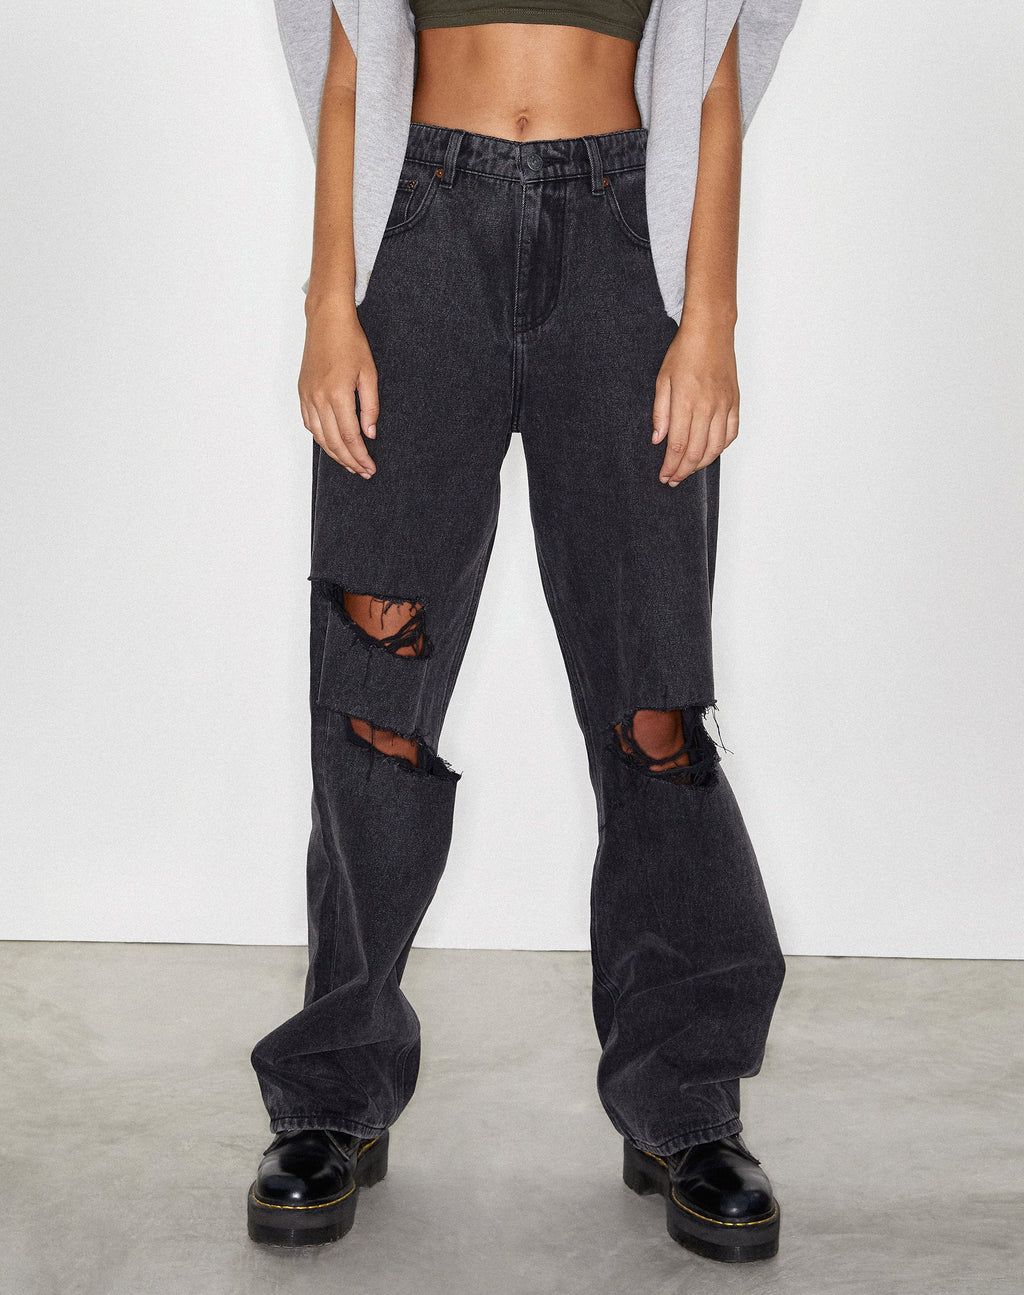 Rips Parallel Jeans in Black Wash